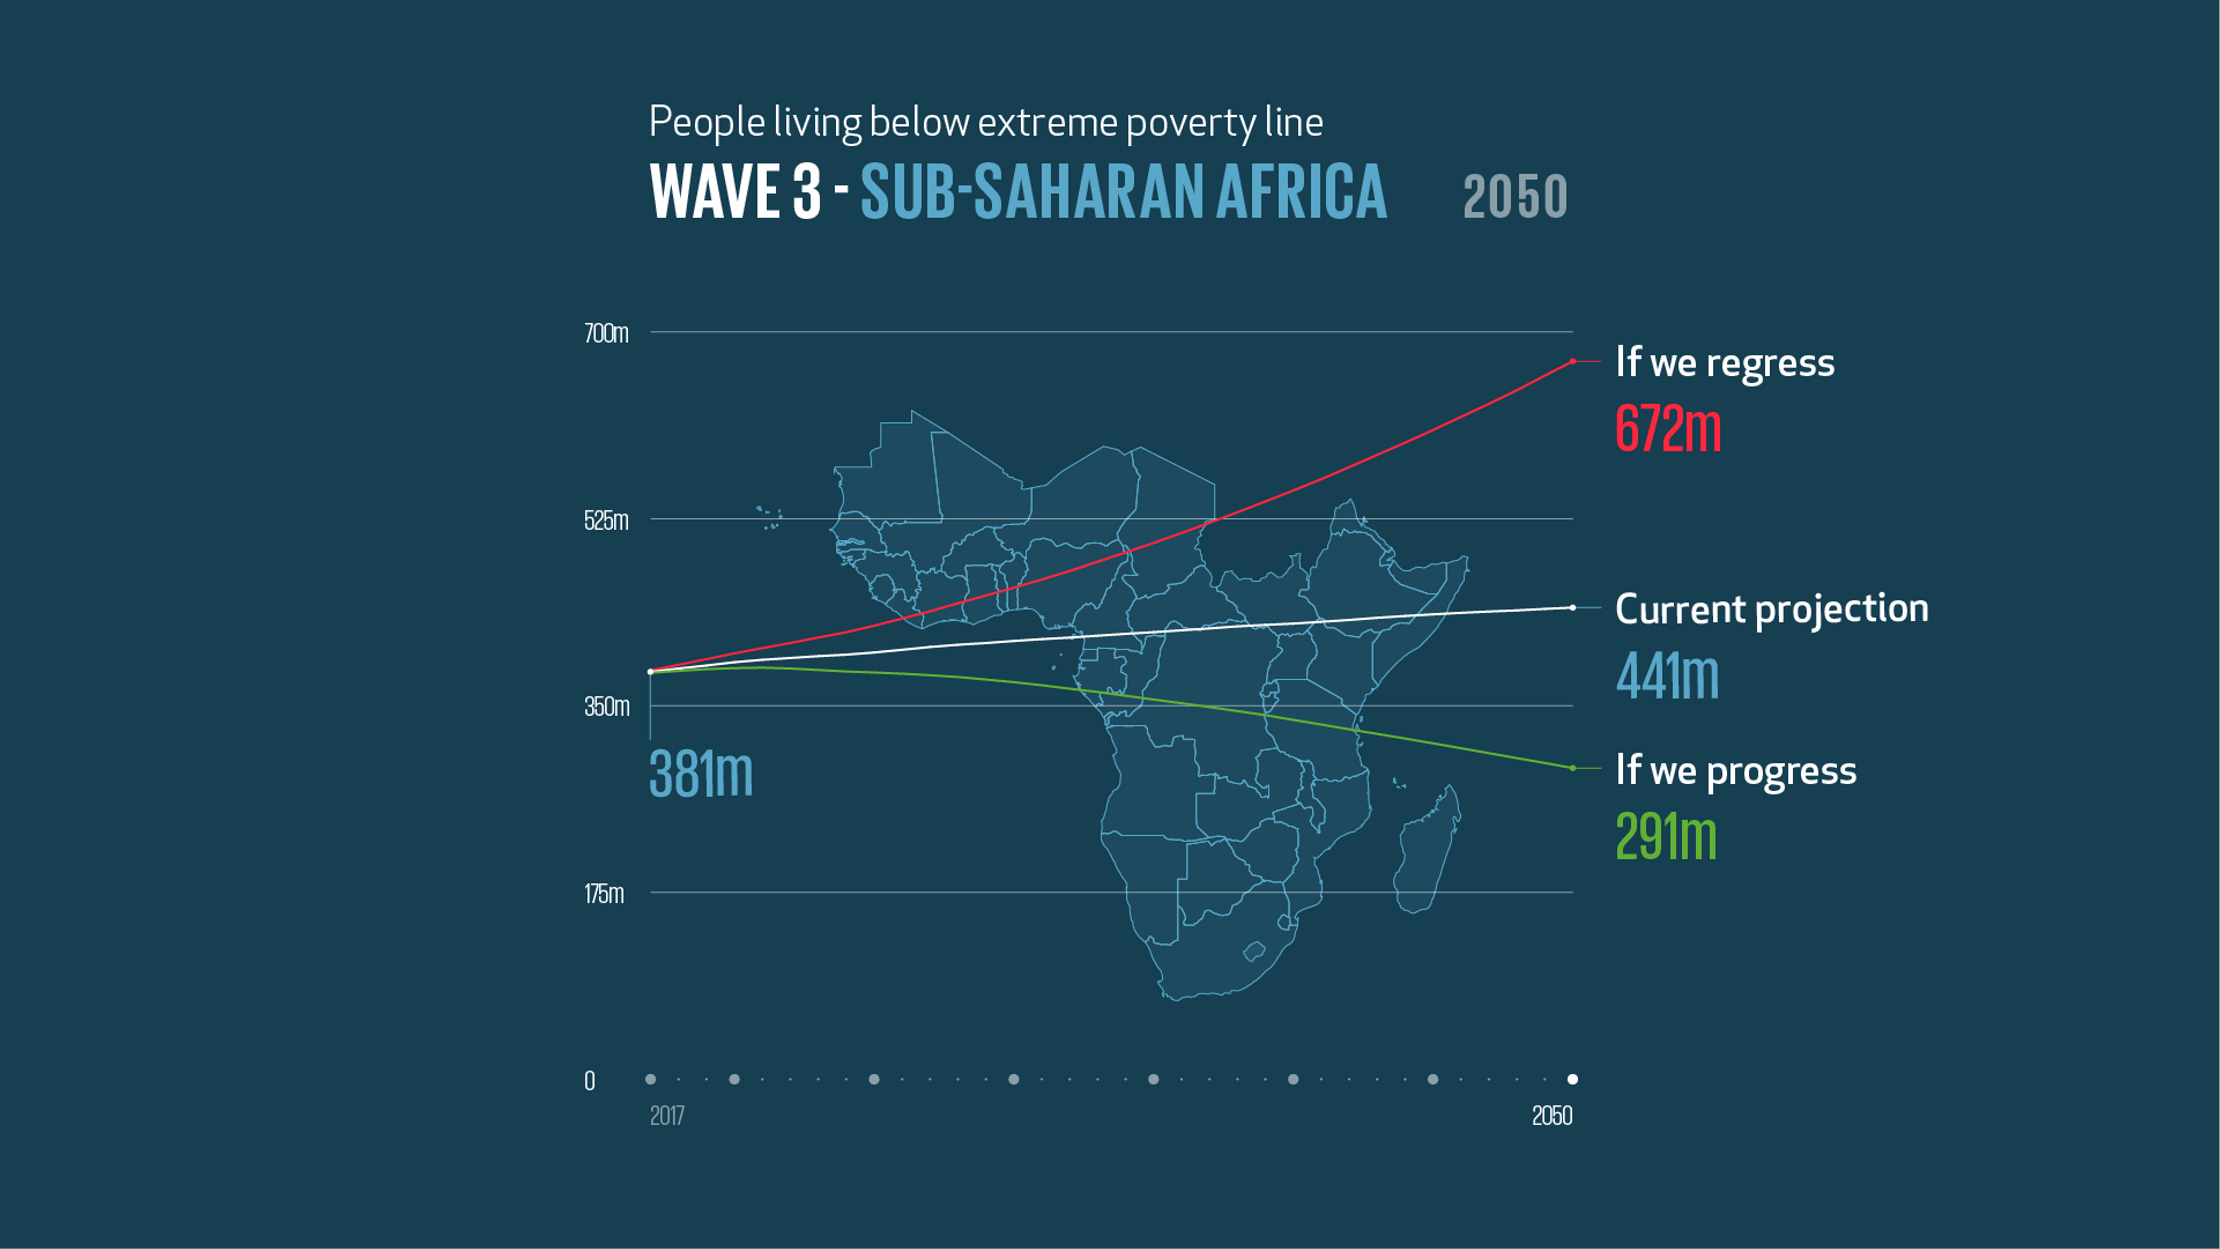 A map of Sub-Saharan Africa sat behind a line chart showing the number of people that might be living below the poverty line in the region between 2017 and 2050. The line chart plots three scenarios: a current projection (441 million people), if we regress (672 million people) and if we progress (291 million people).  